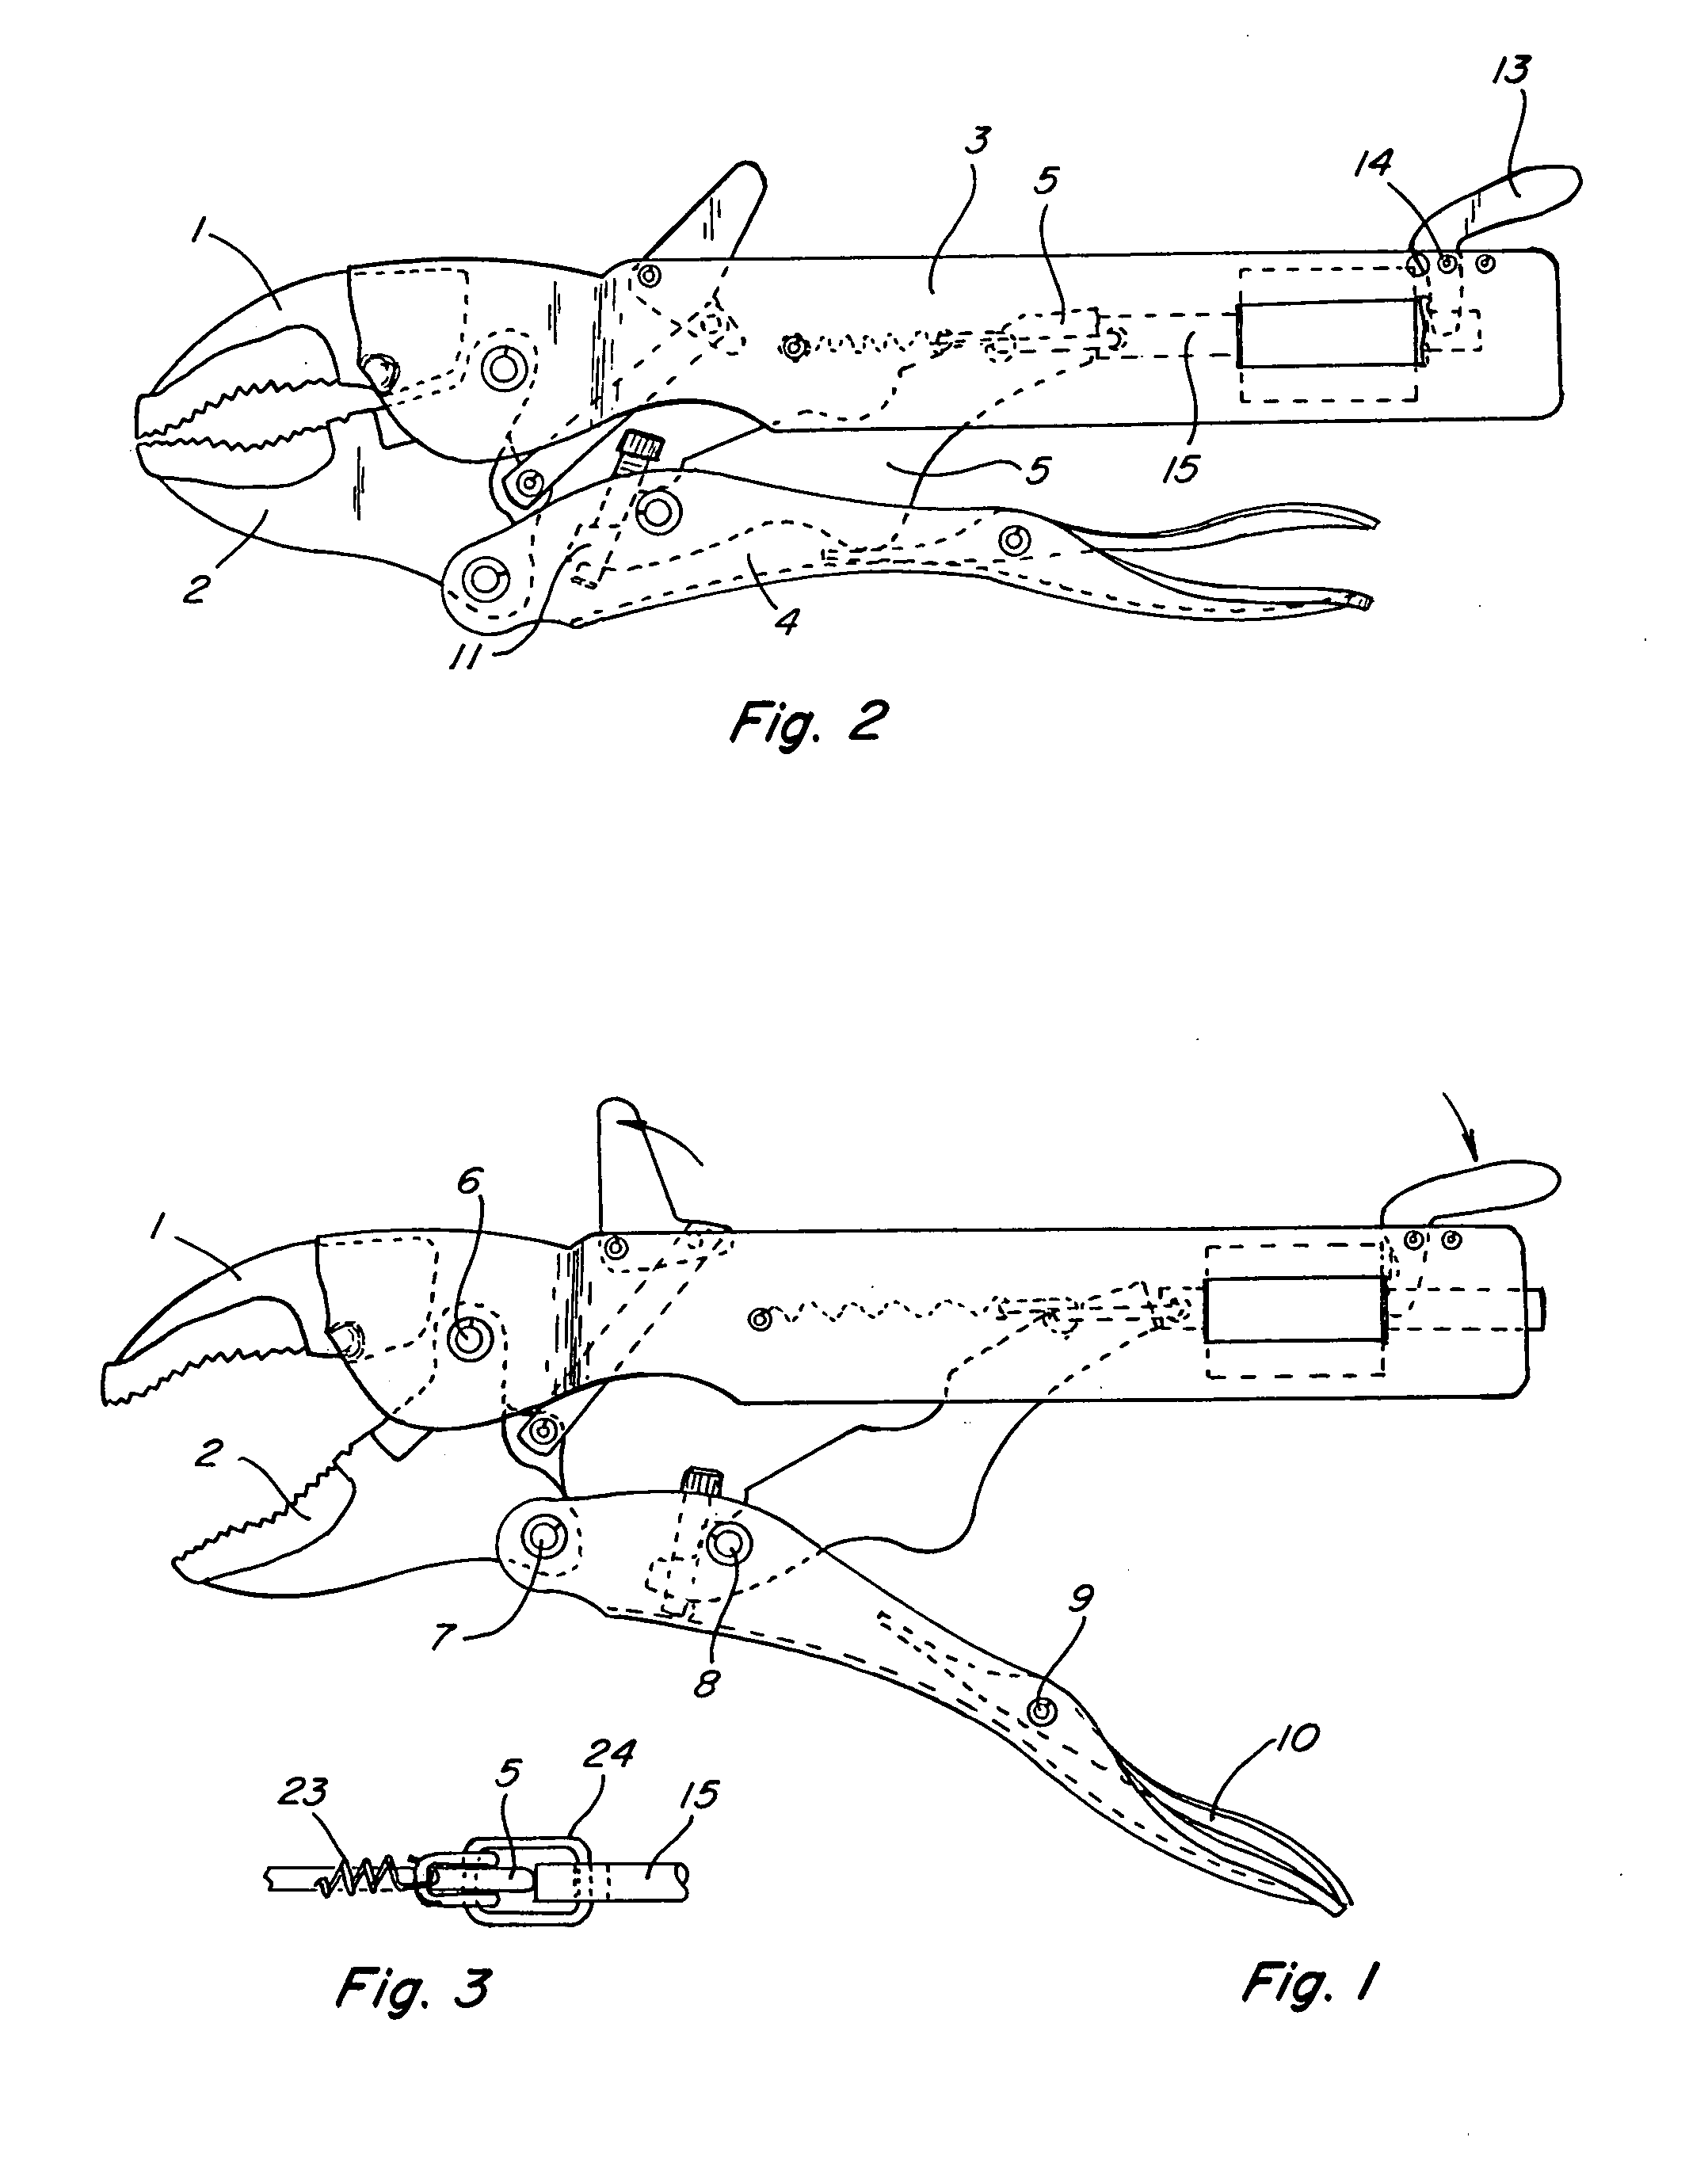 Automatic sizing one-handed locking pliers